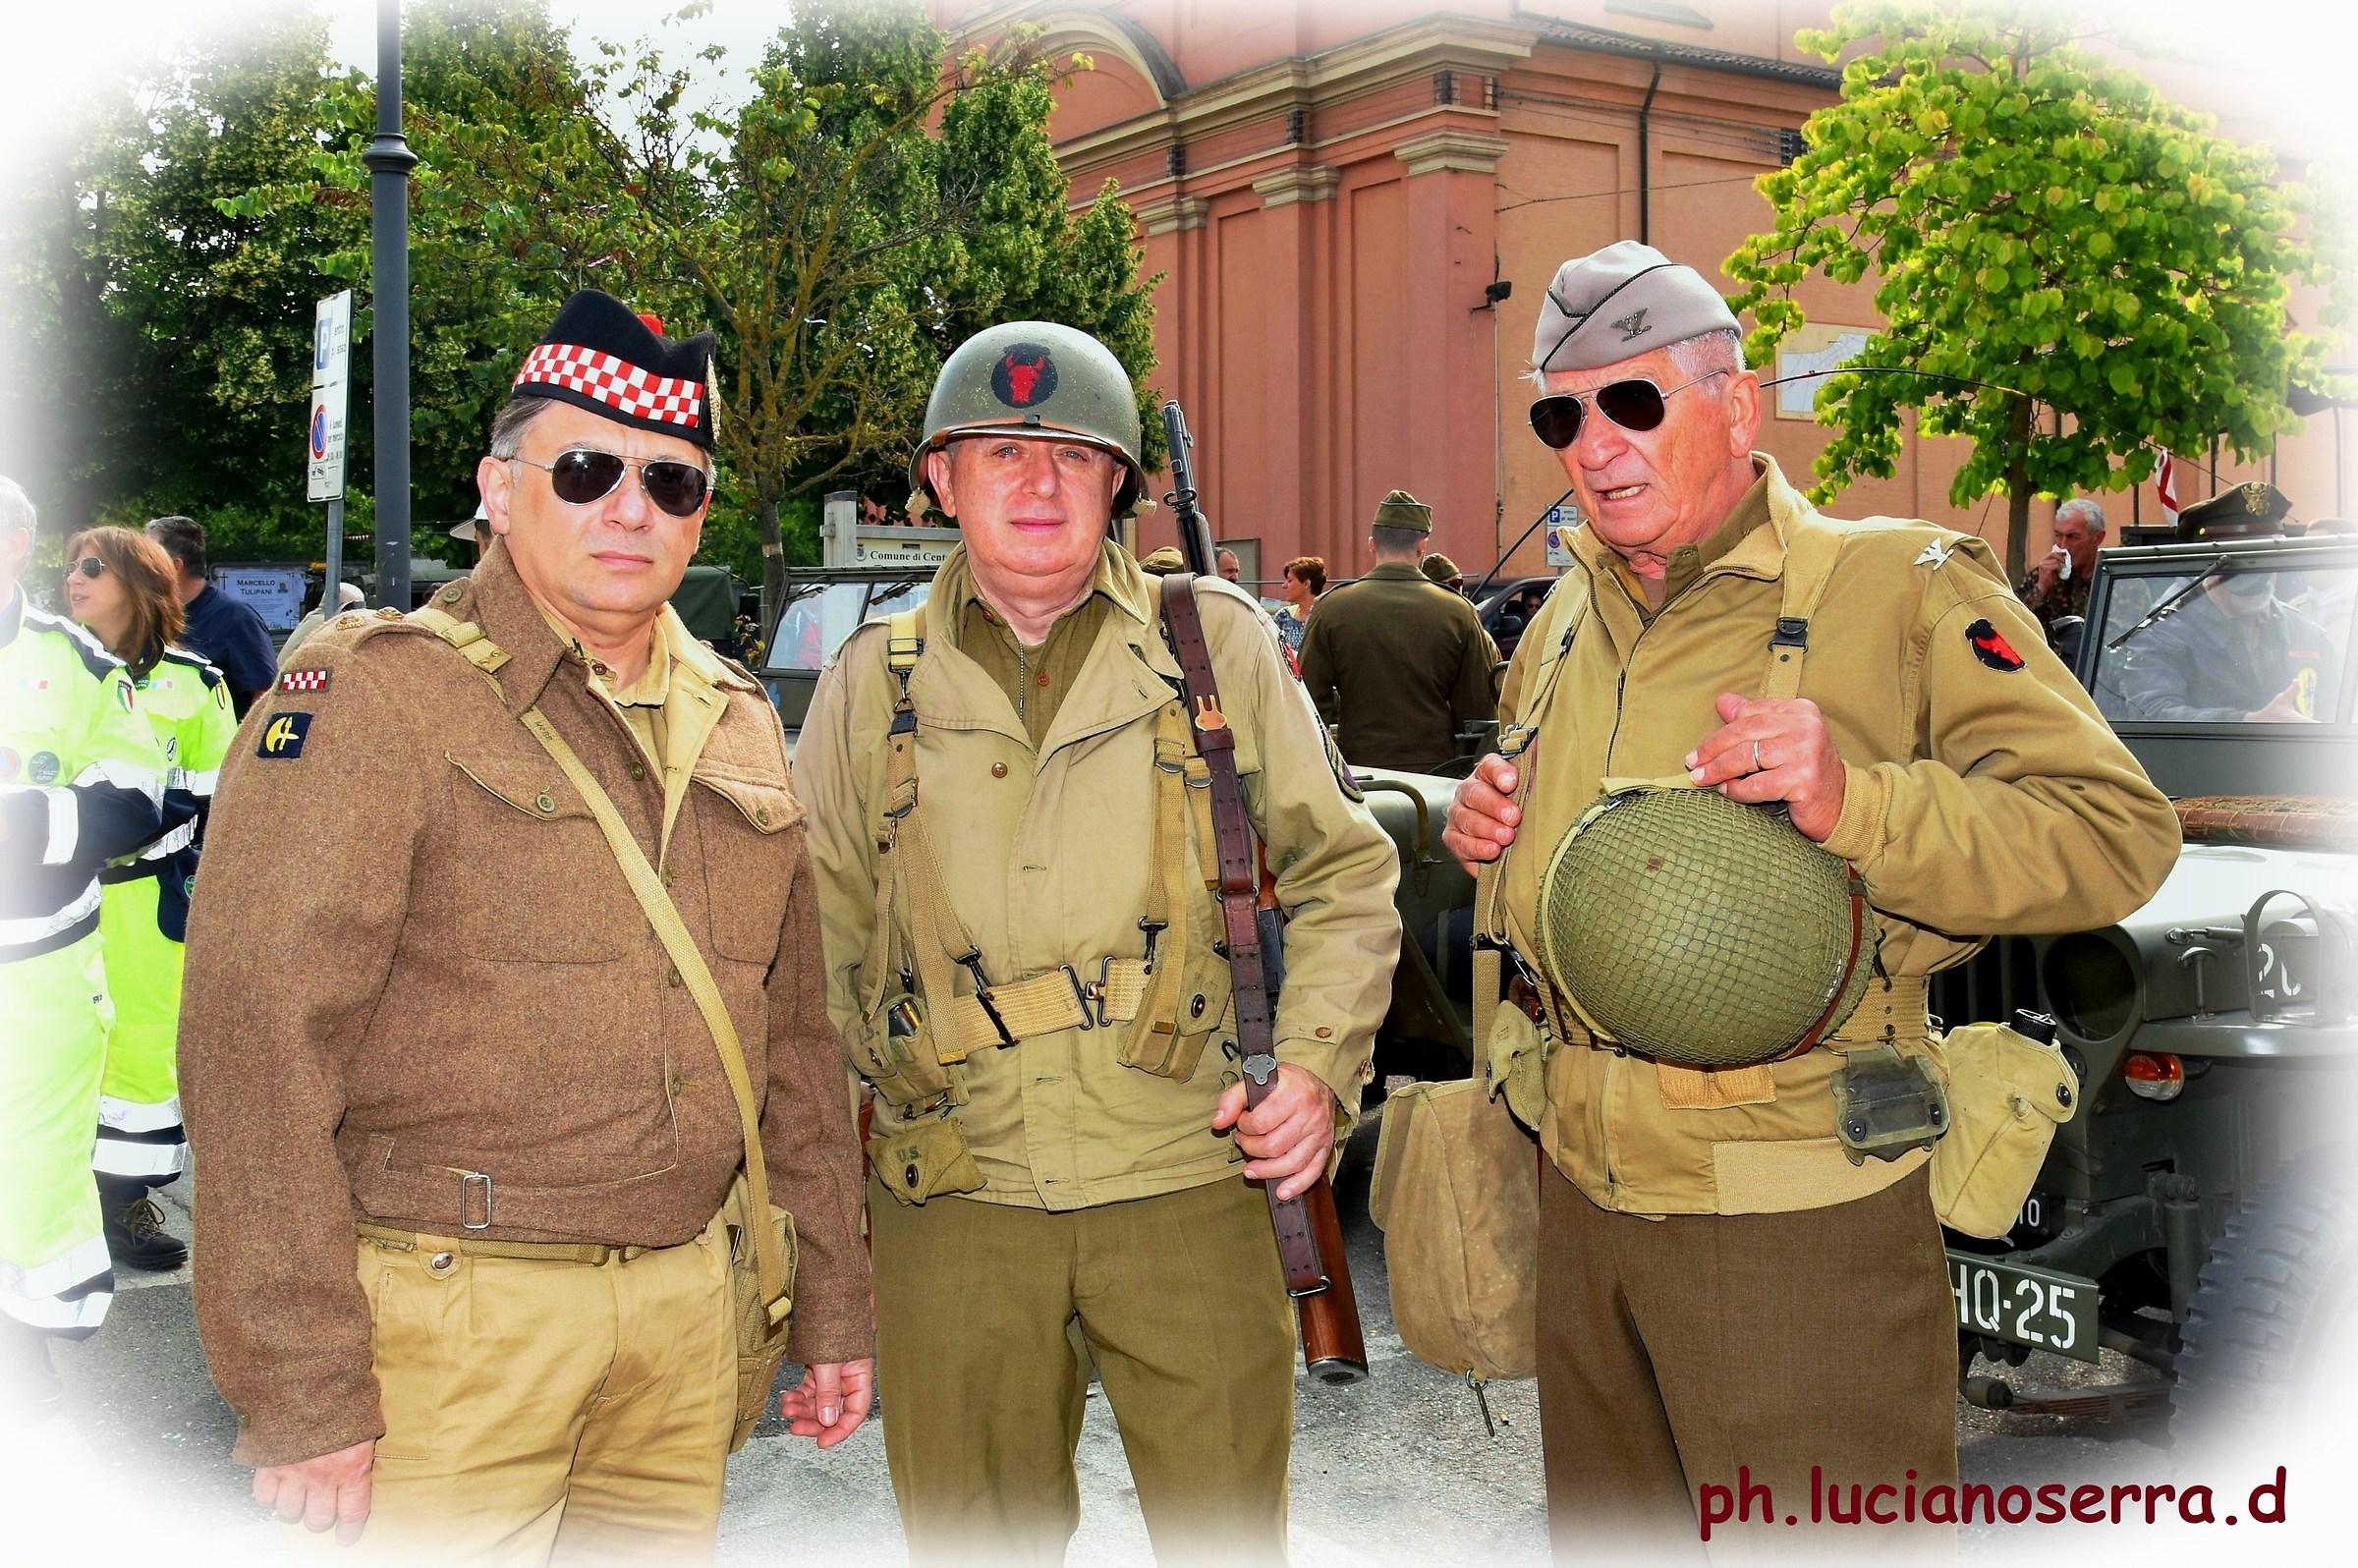 Contained with military uniforms of World War II...